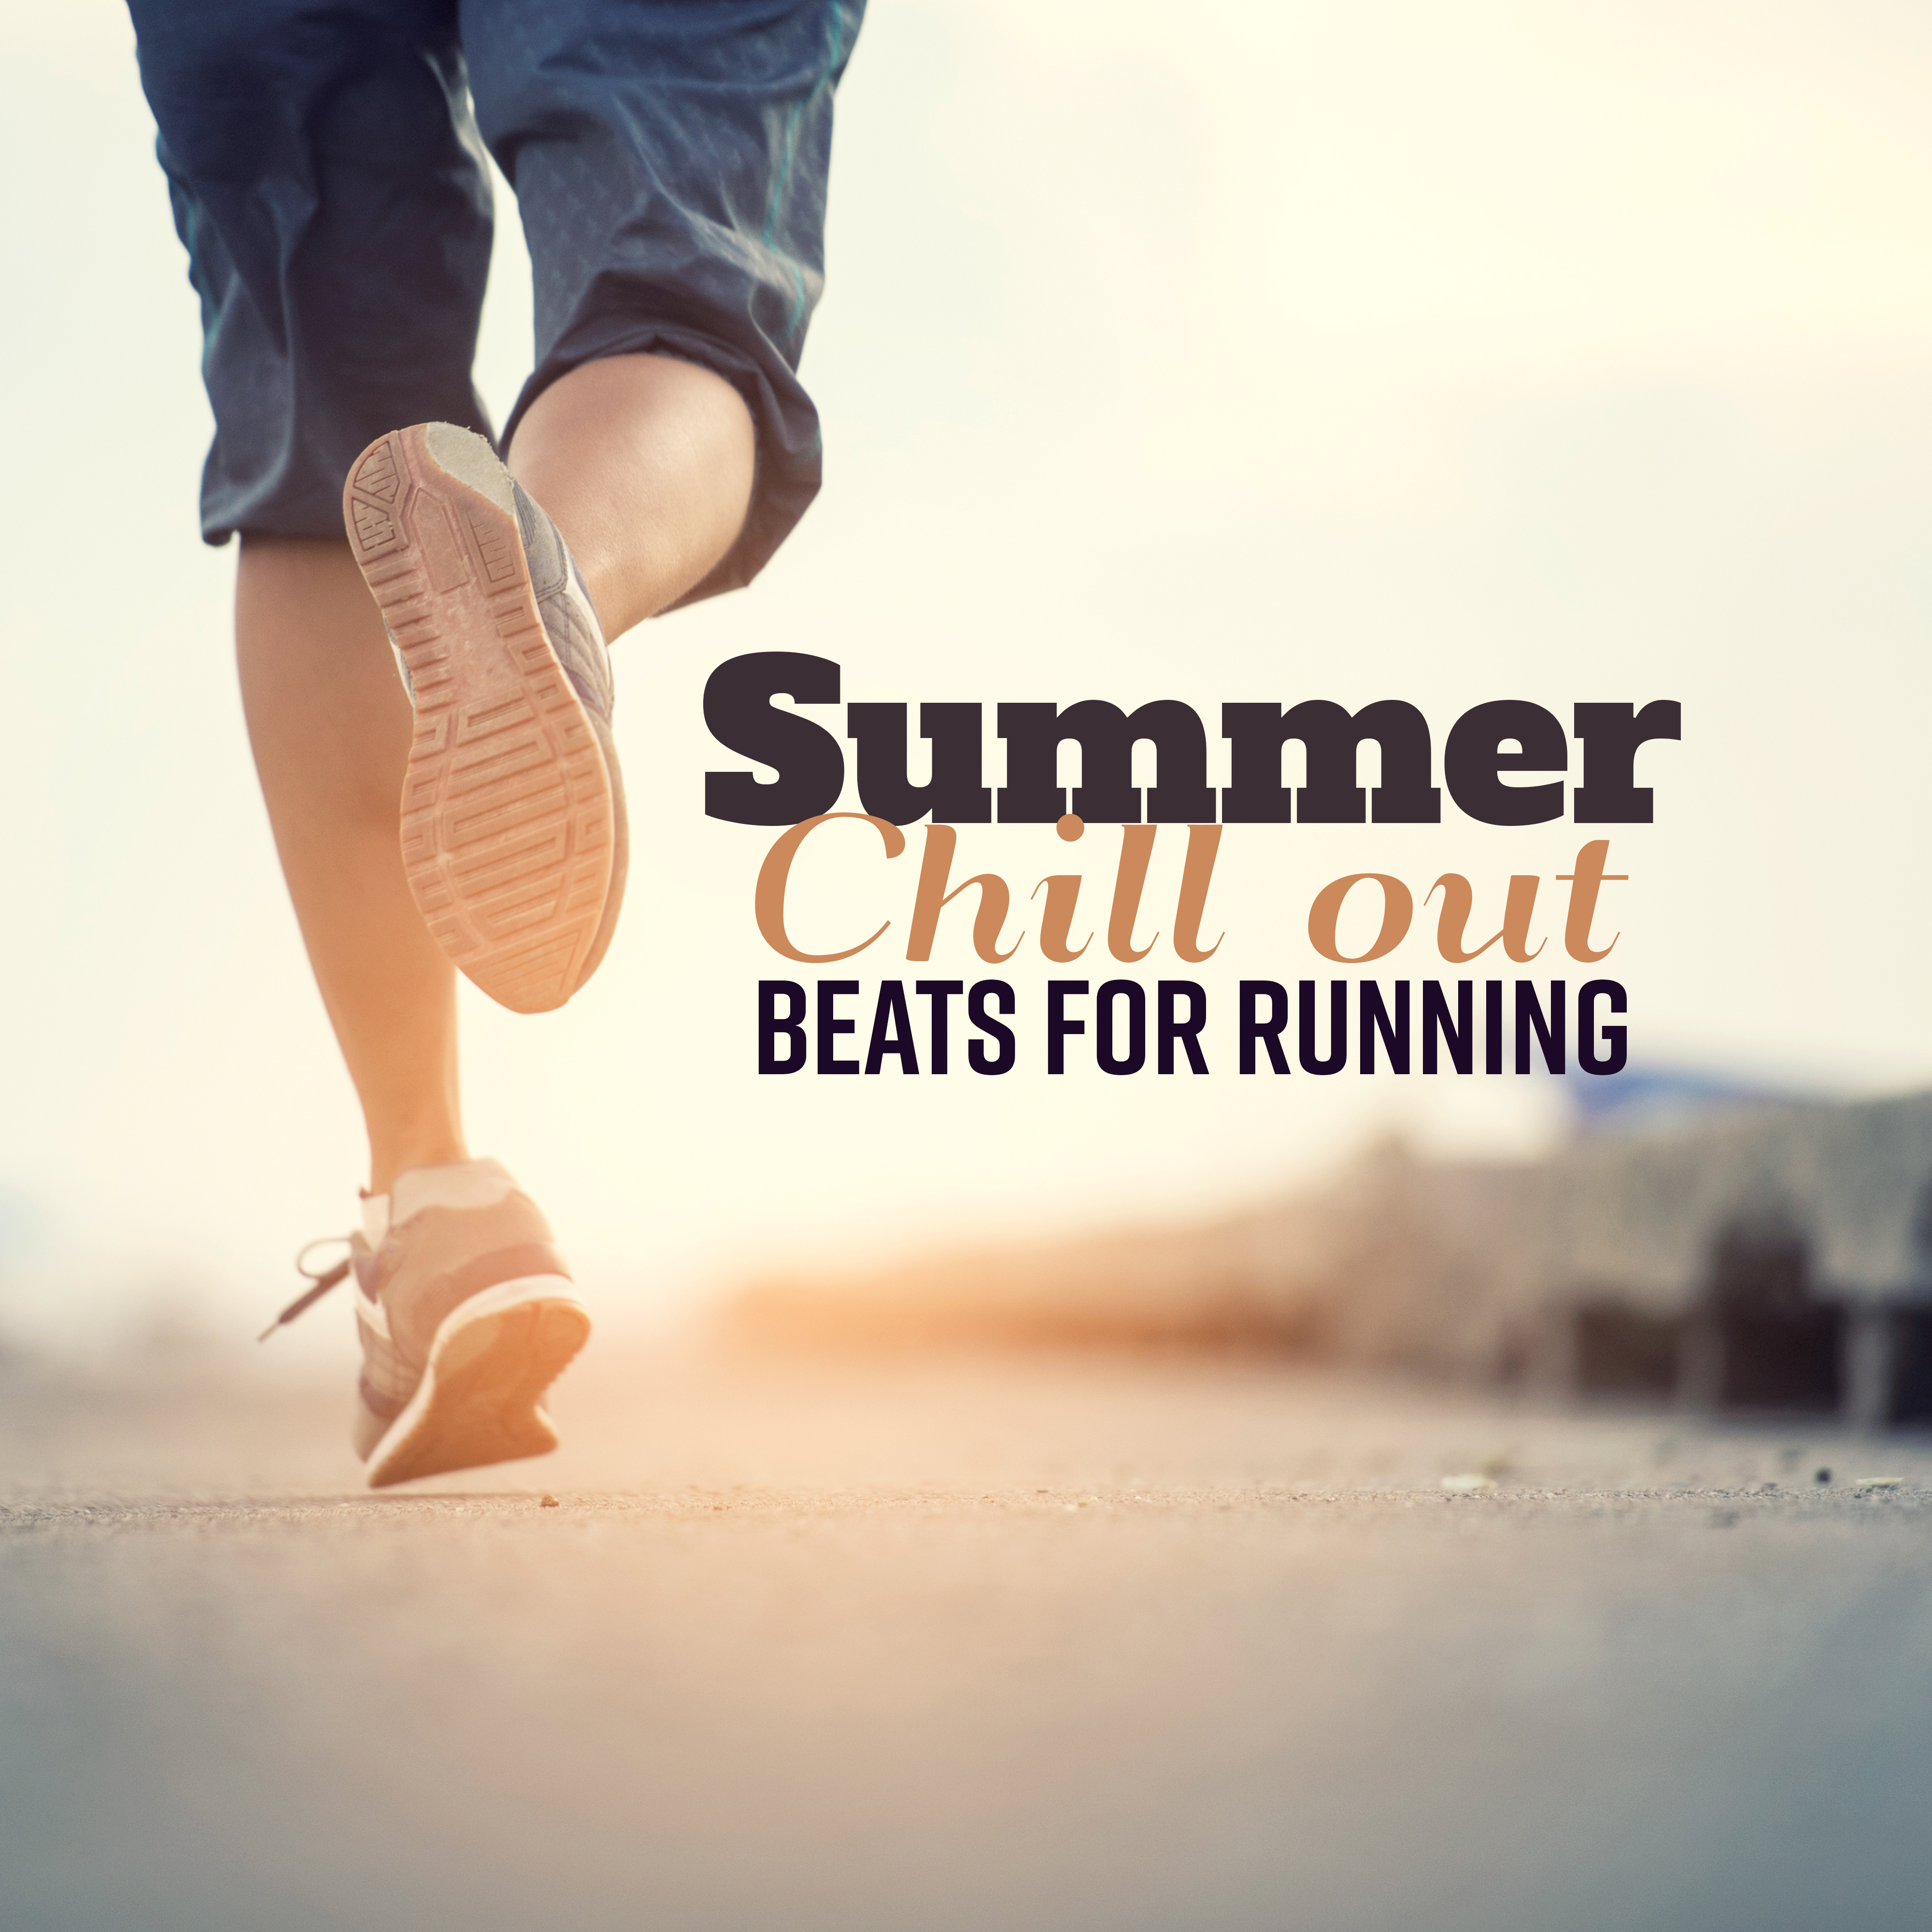 Summer Chillout Beats for Running